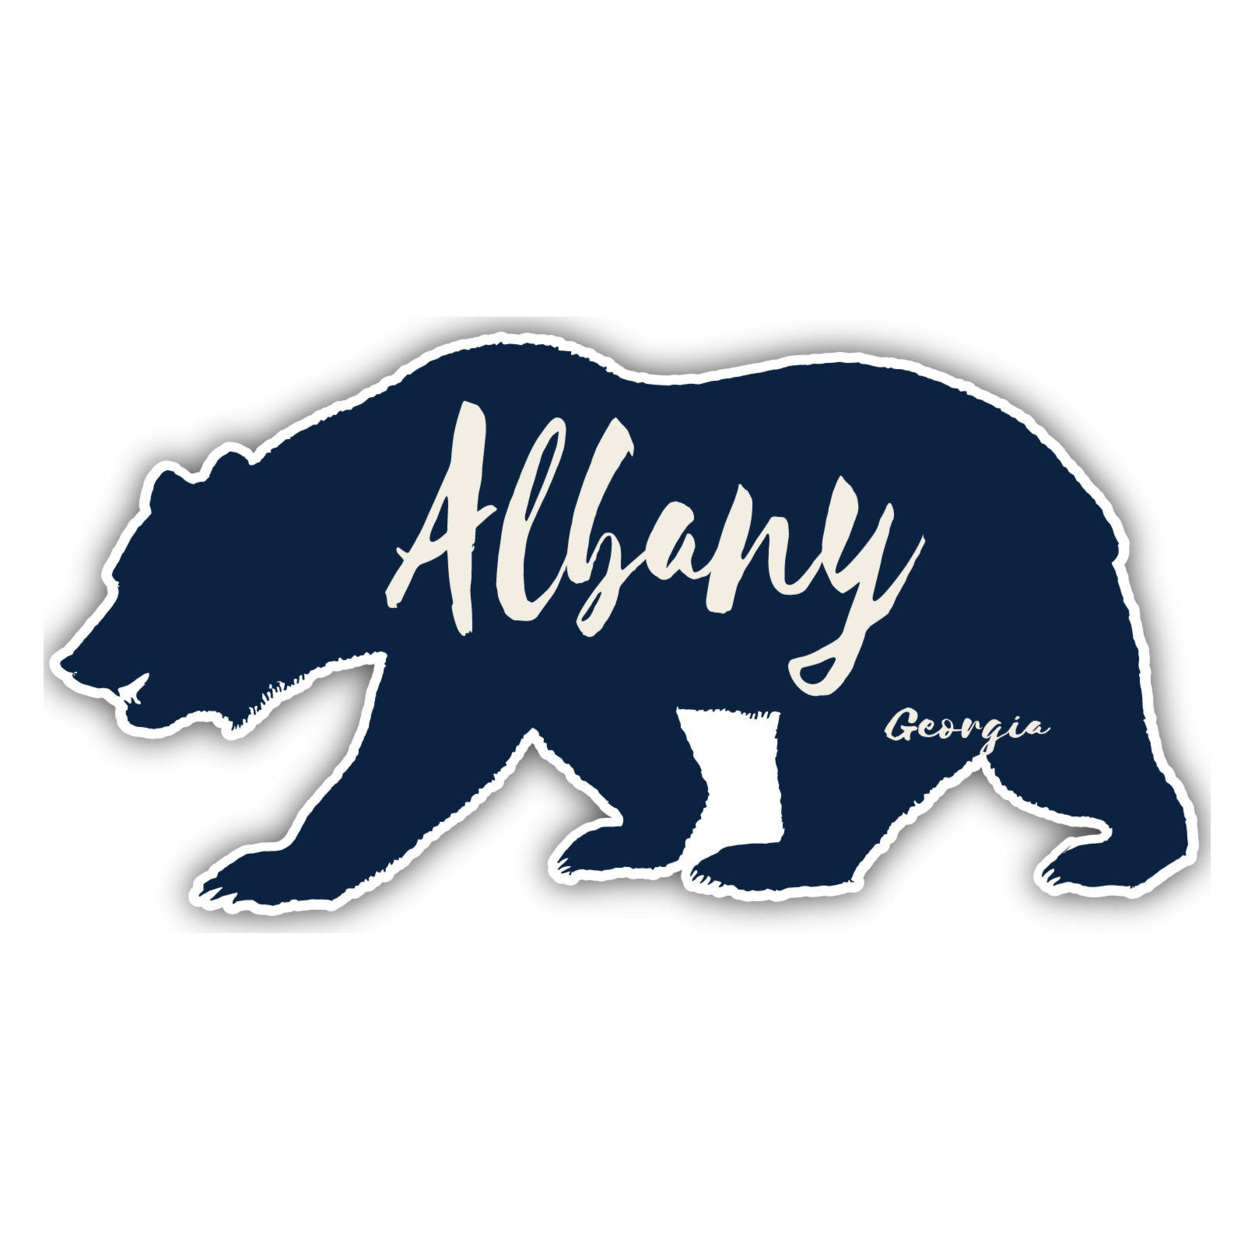 Albany Georgia Souvenir Decorative Stickers (Choose Theme And Size) - 4-Pack, 8-Inch, Bear